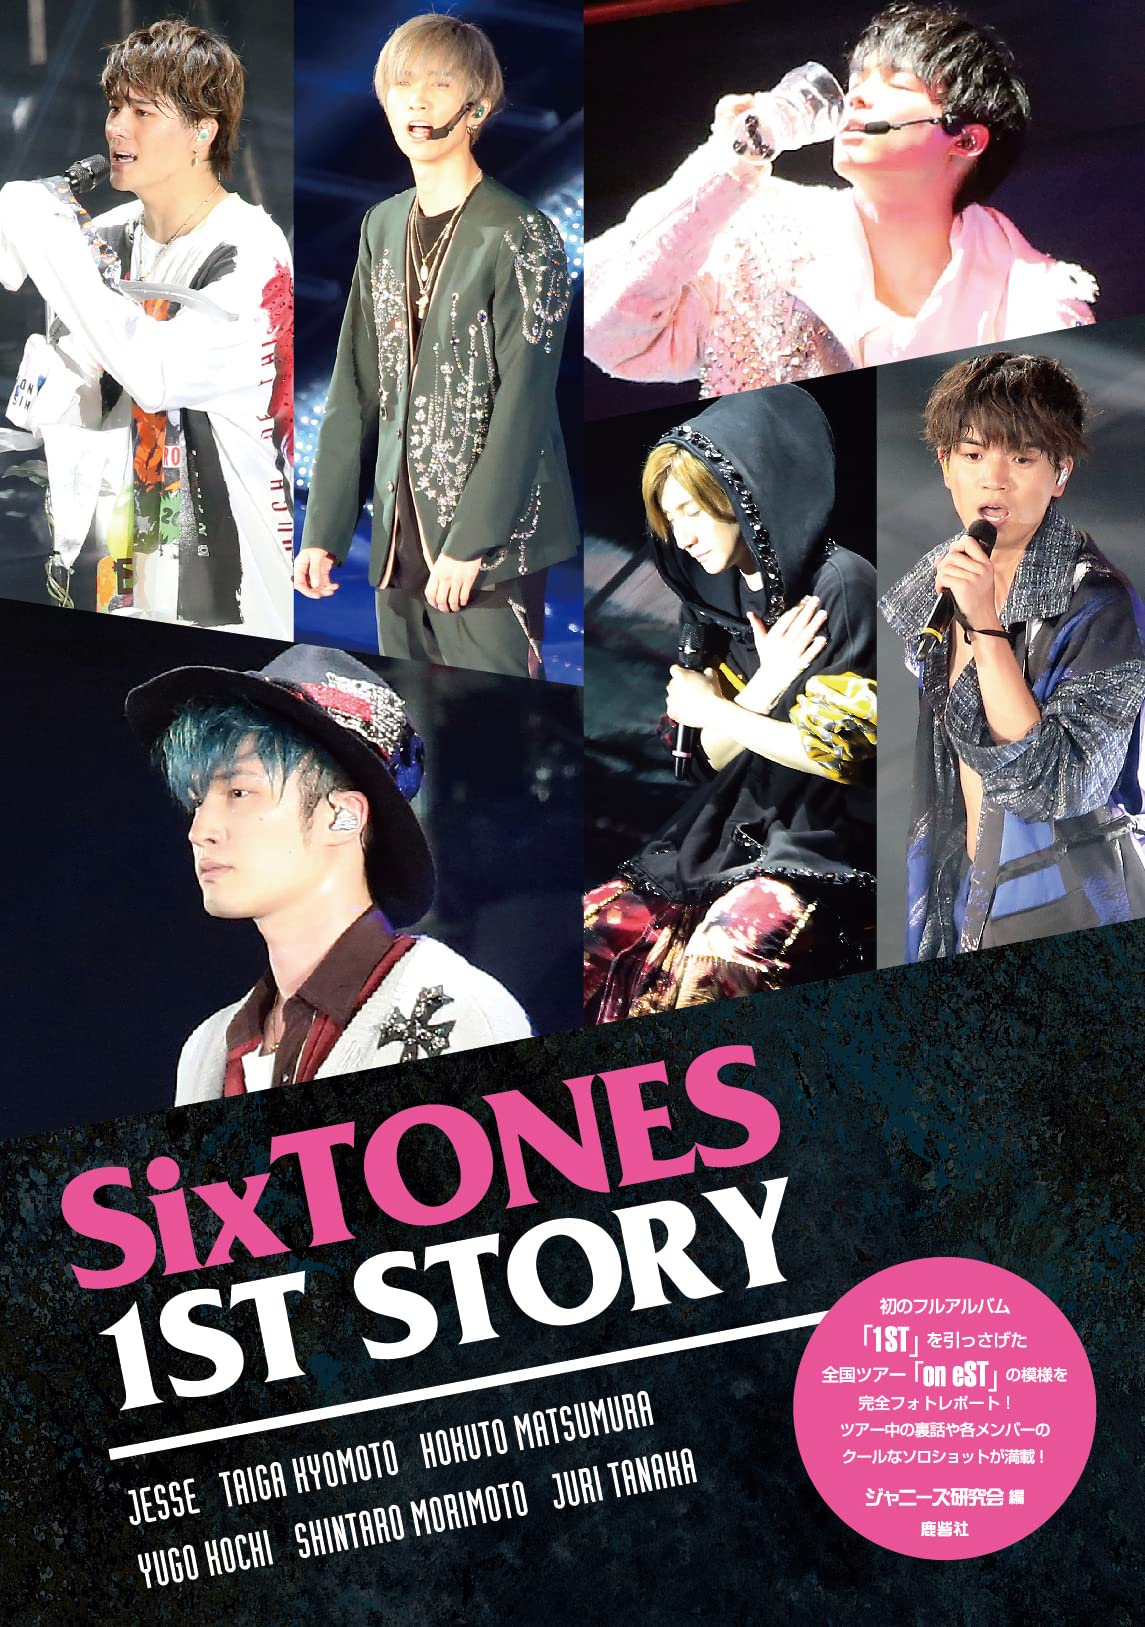 SixTONES 1ST STORY – Japanese Book Store